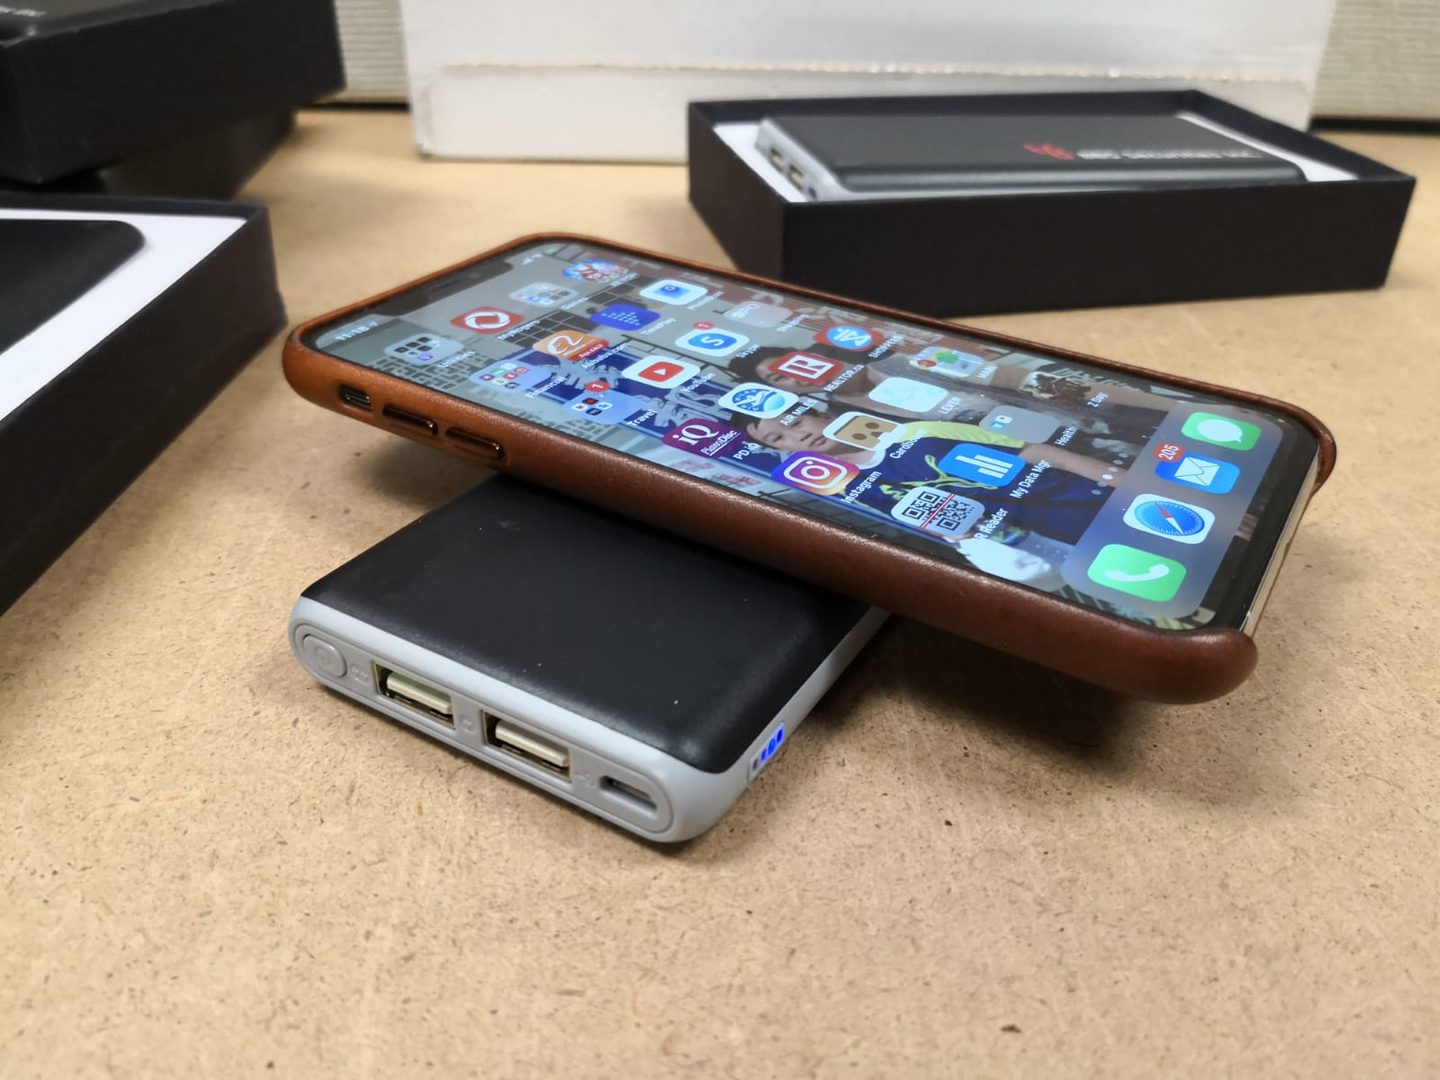 Mobile placed on Wireless Battery Charger